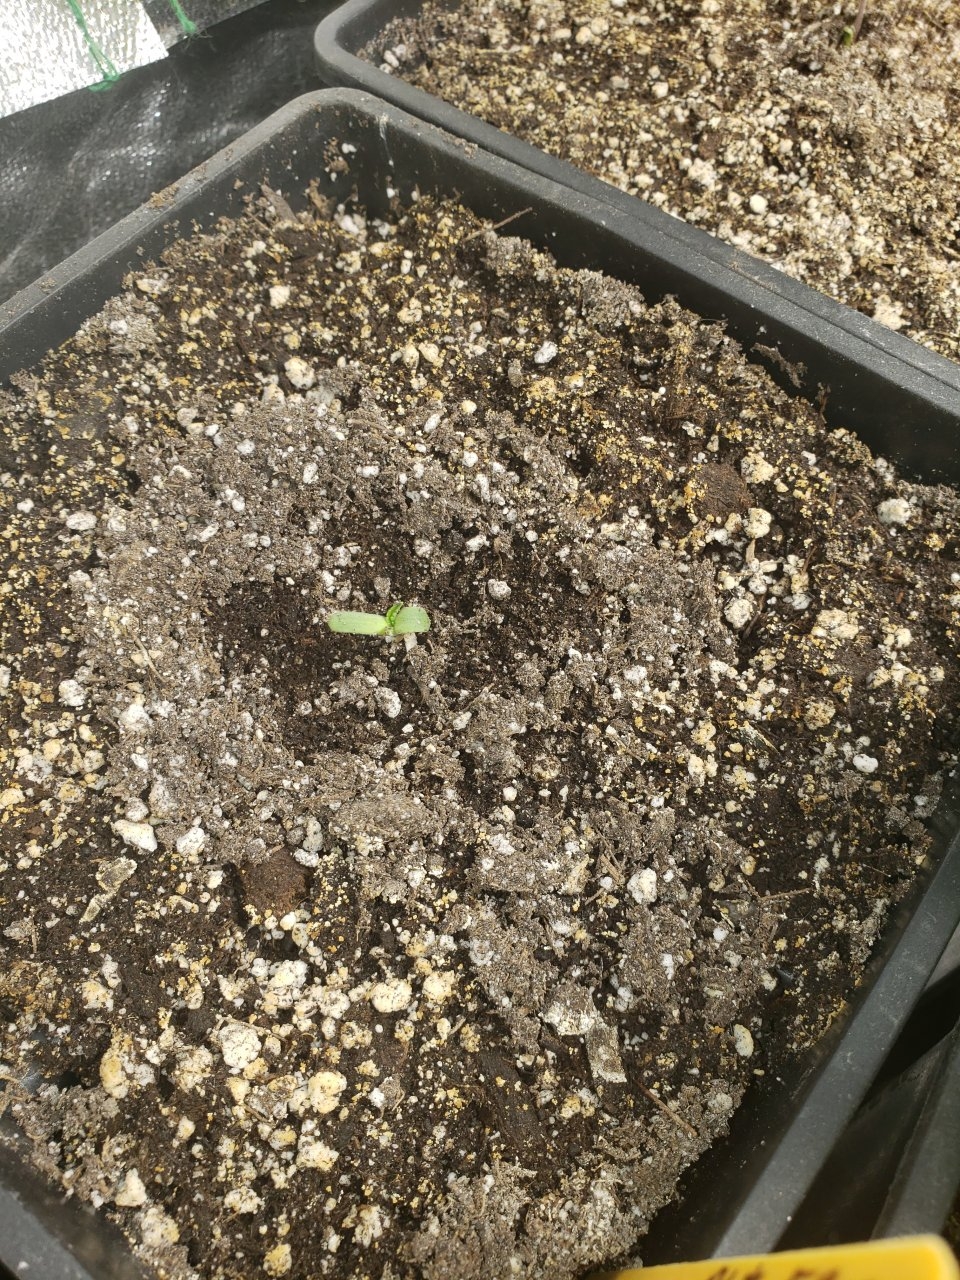 The yellow HB R.L.T seedling now green lol